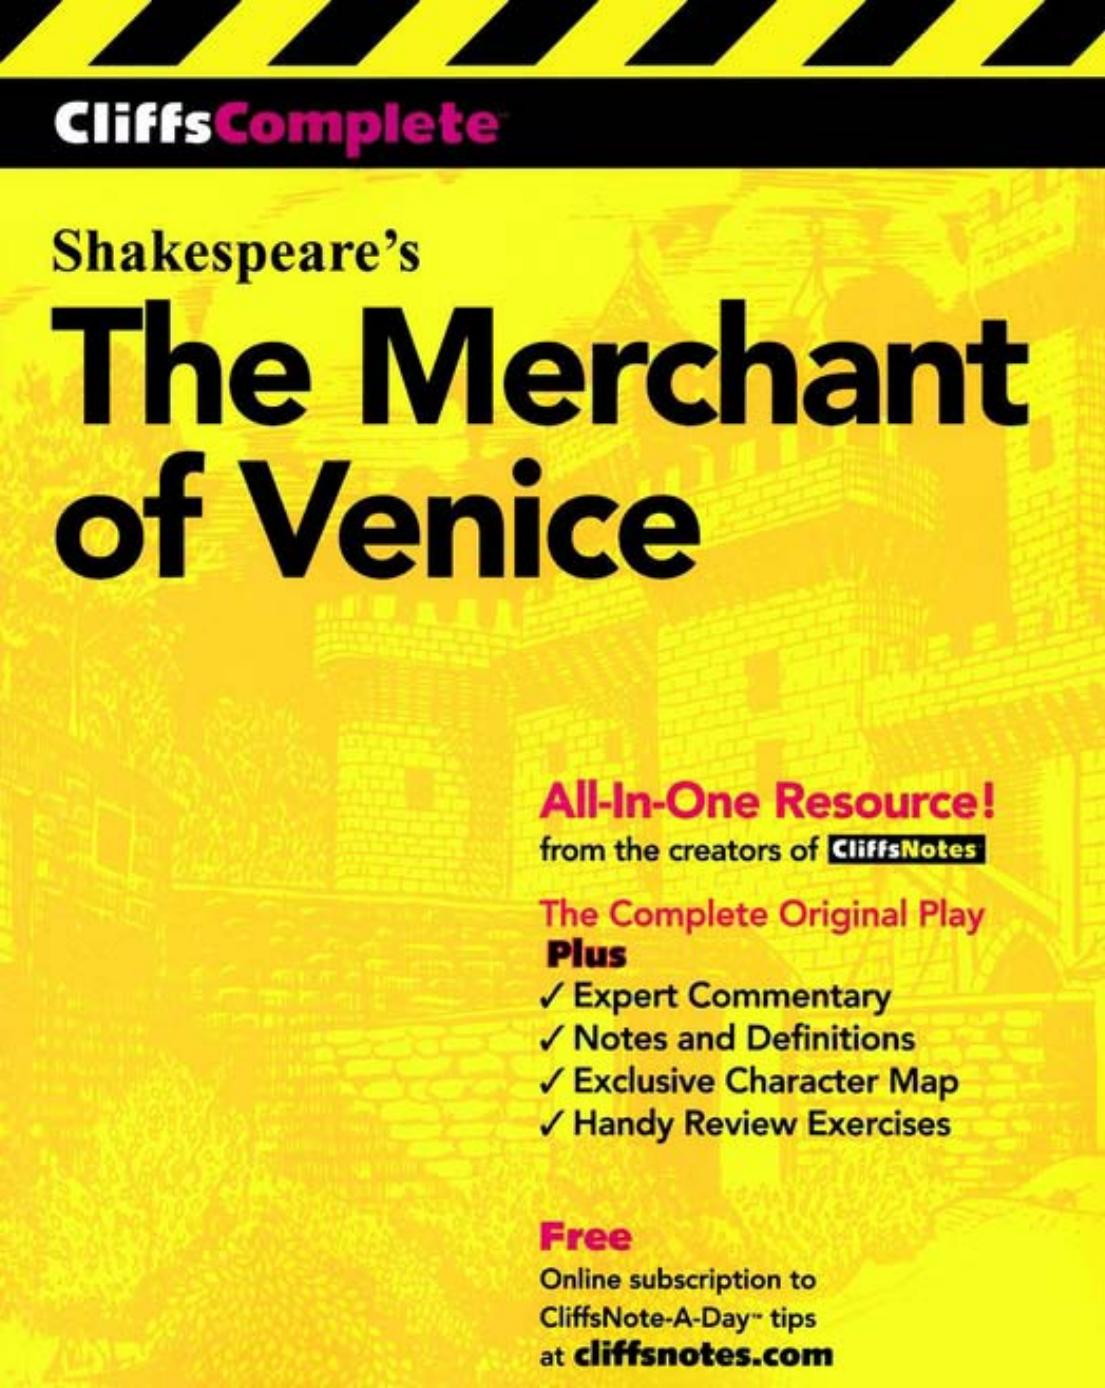 Cliffs Complete Shakespeare's The Merchant of Venice by David Nicol Edited by Sidney Lamb